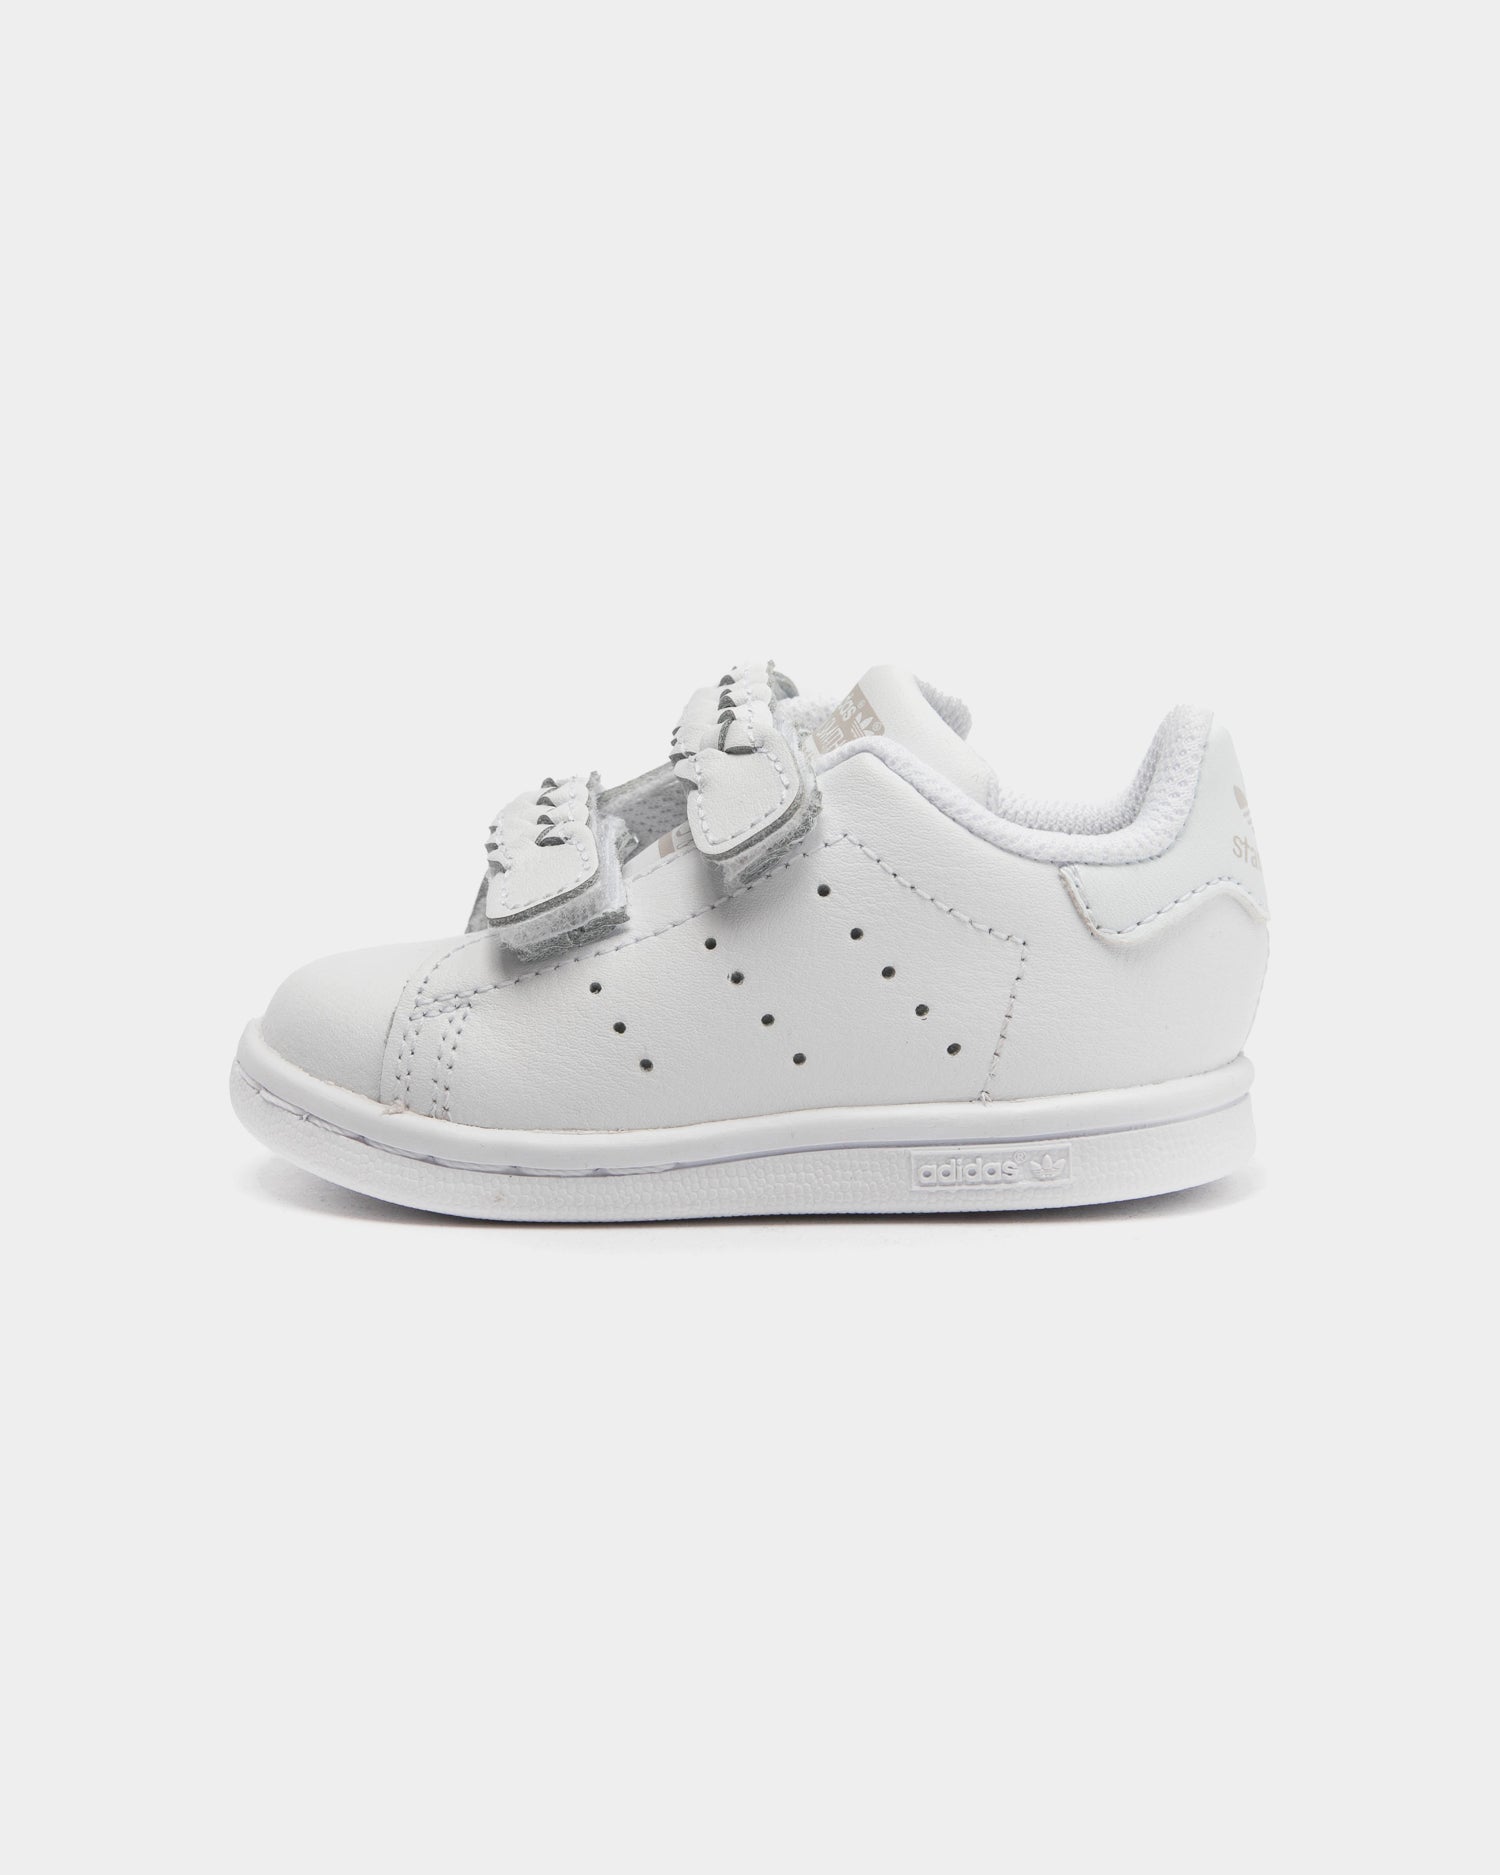 stan smith trainers green